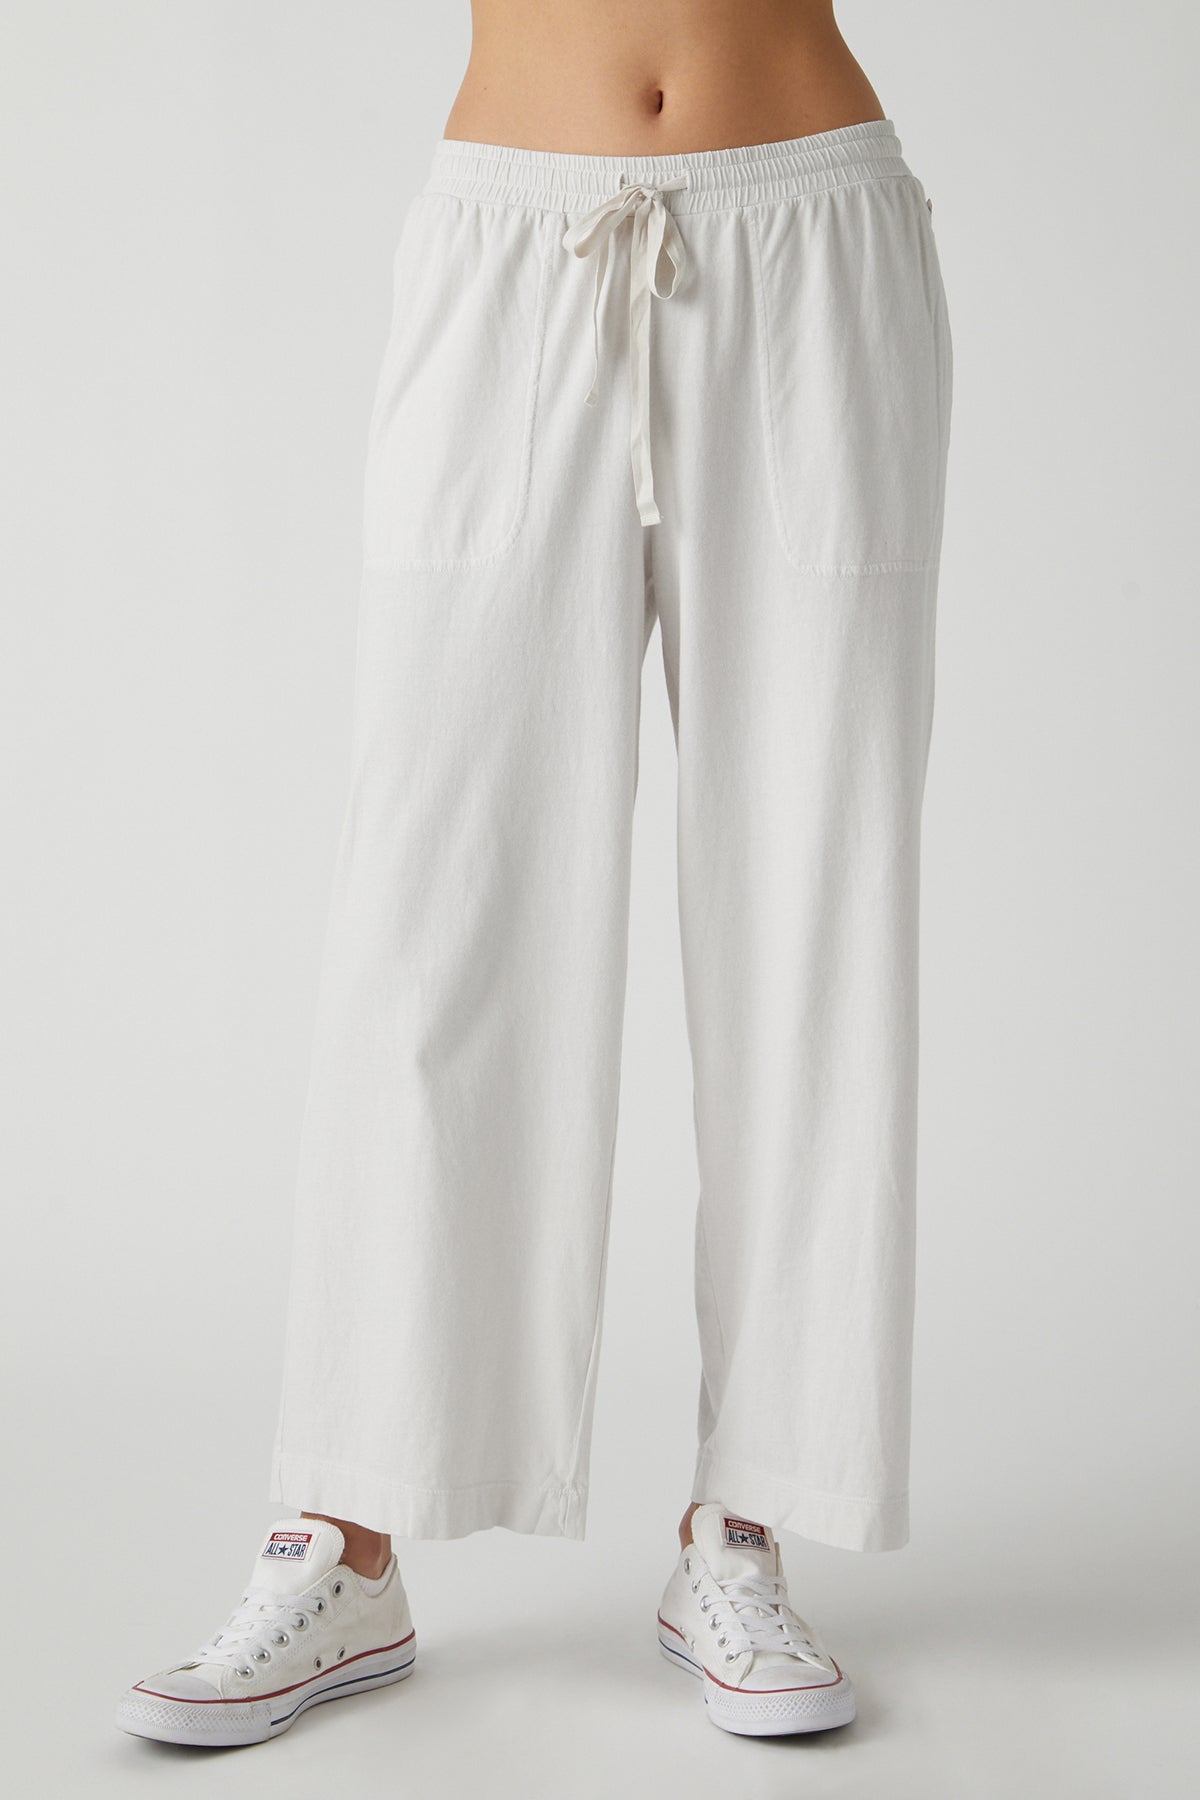 A woman wearing a white Velvet by Jenny Graham PISMO PANT.-26040561696961